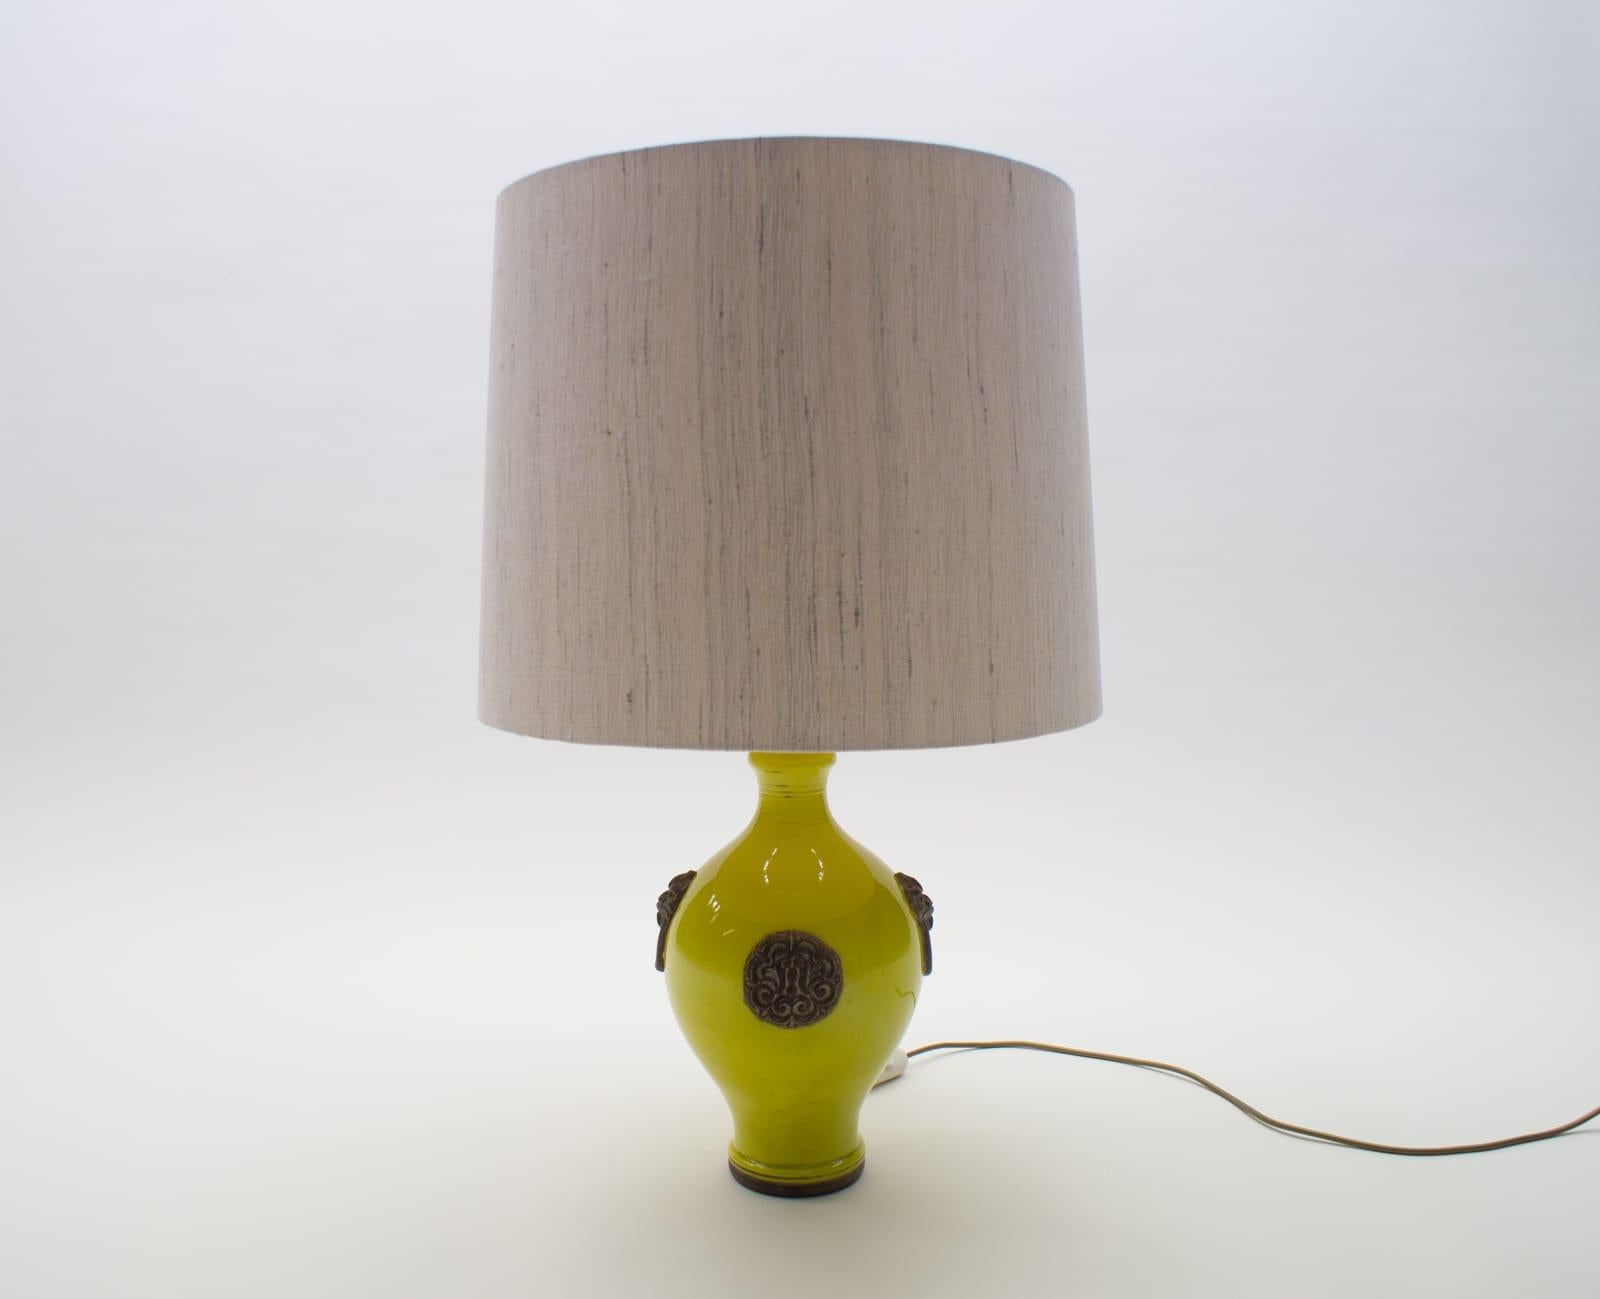 Oatmeal and Yellow Gilt Glazed Ceramic Table Lamp by Ugo Zaccagnini, Italy 1960s (Moderne der Mitte des Jahrhunderts) im Angebot